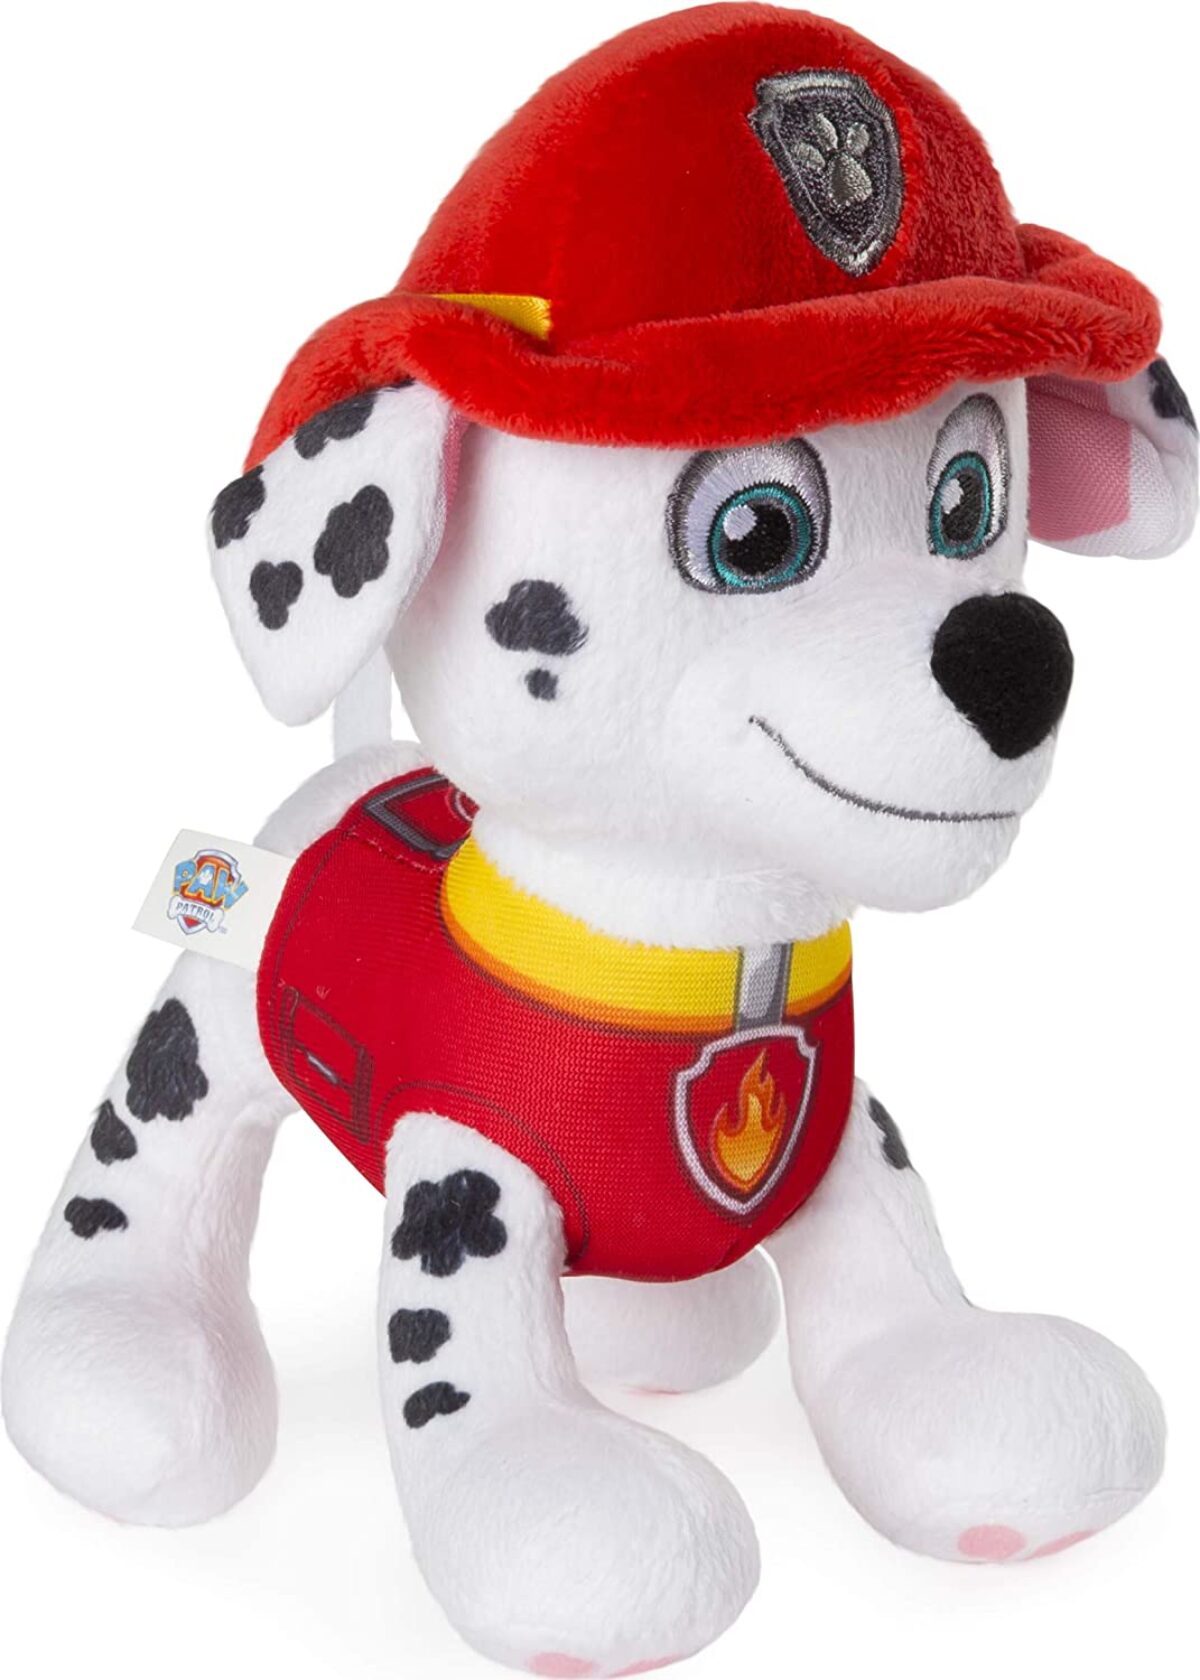 OFFICIAL PAW PATROL MISSION MARSHALL LARGE 12" PLUSH SOFT TOY TEDDY NEW WITH TAG 